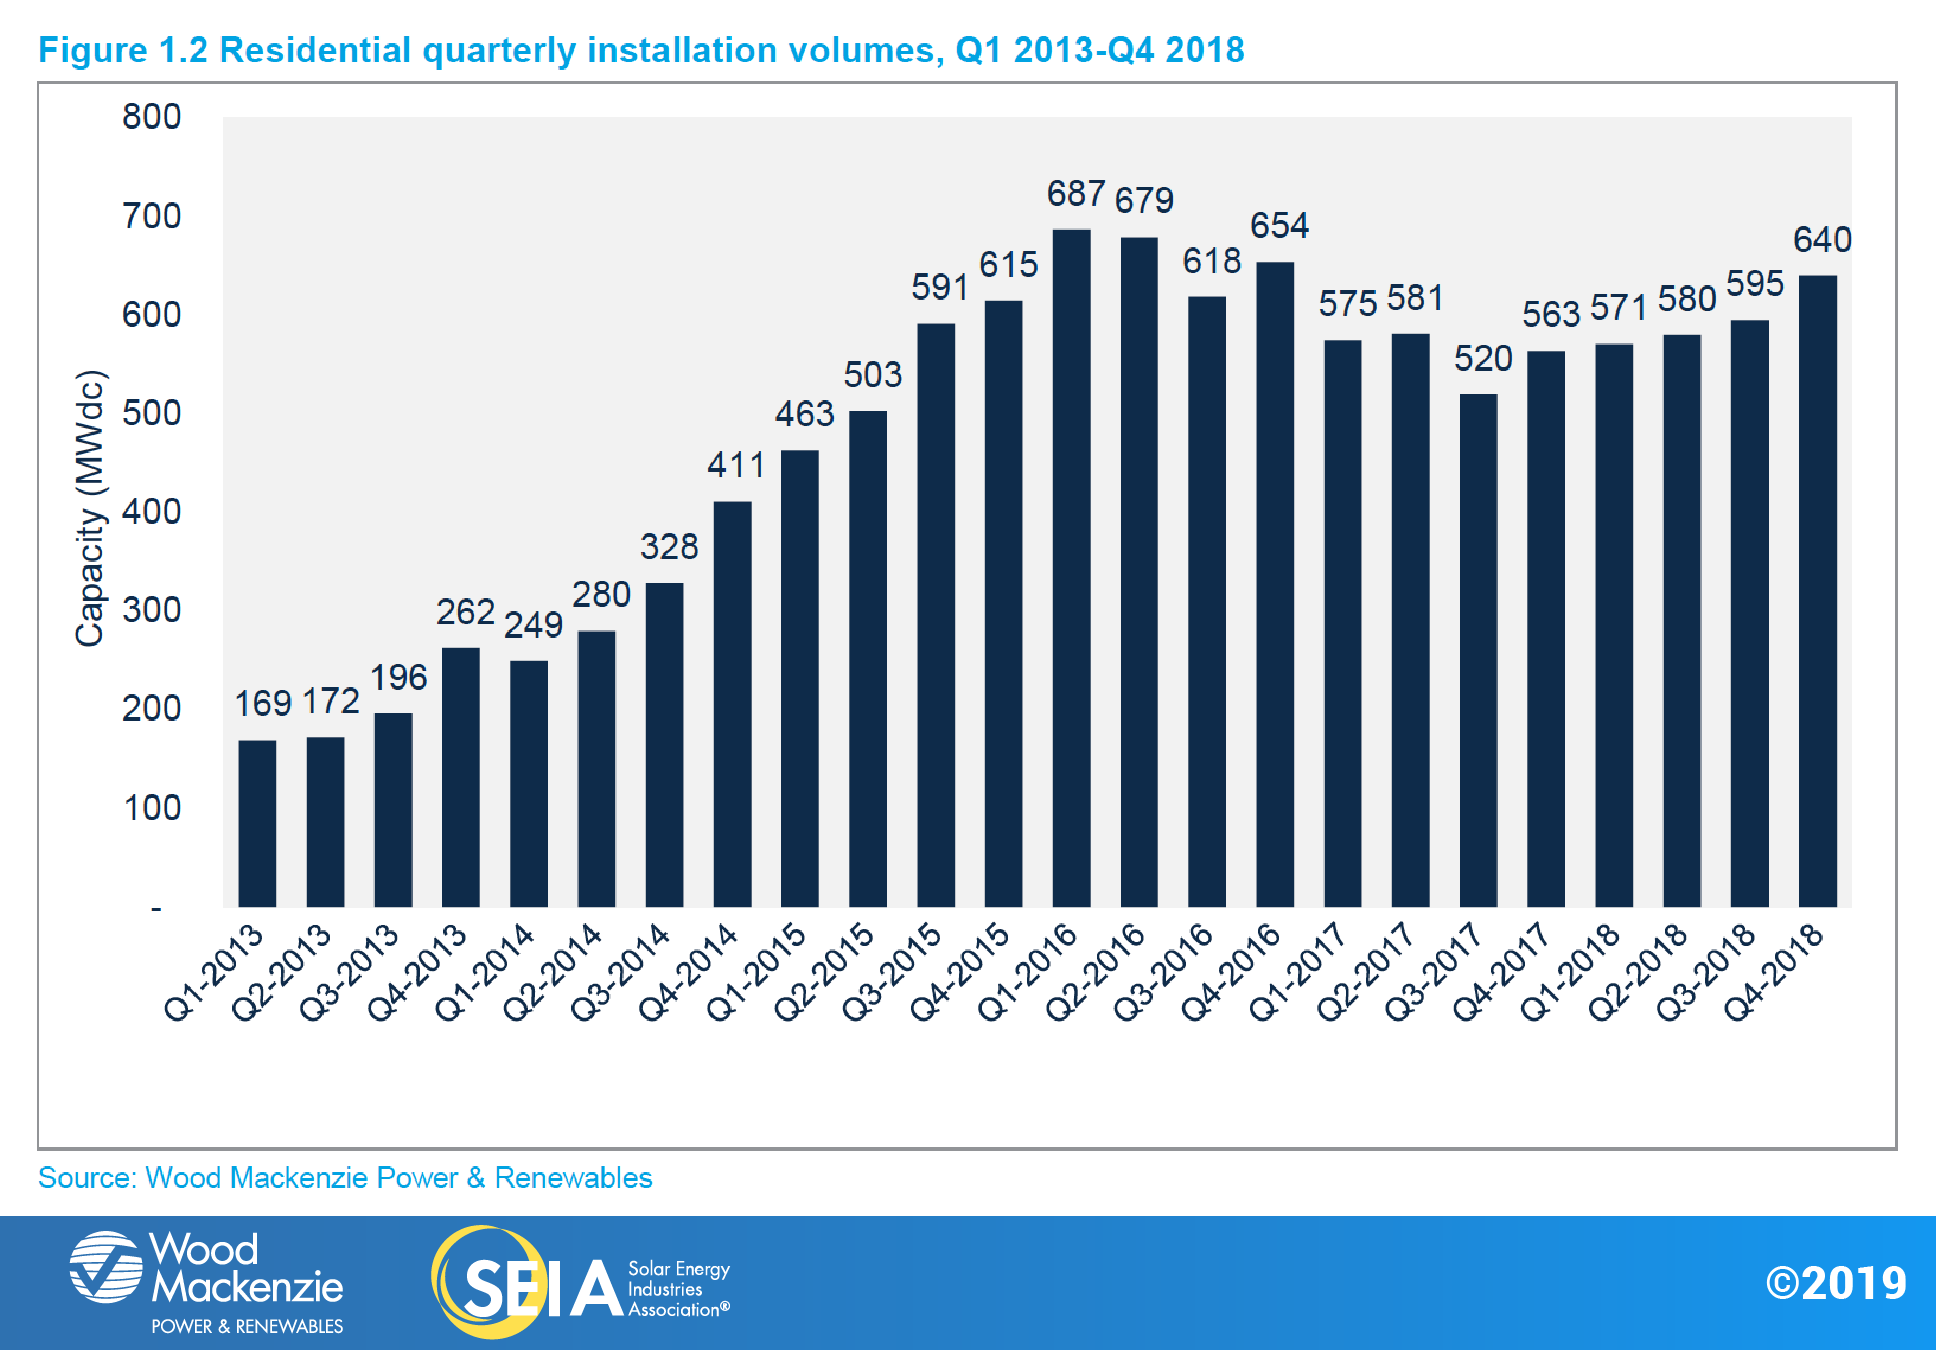 Steady growth of residential PV installations shows the market nears maturity, the analysis said (Credit: SEIA / Wood Mackenzie)